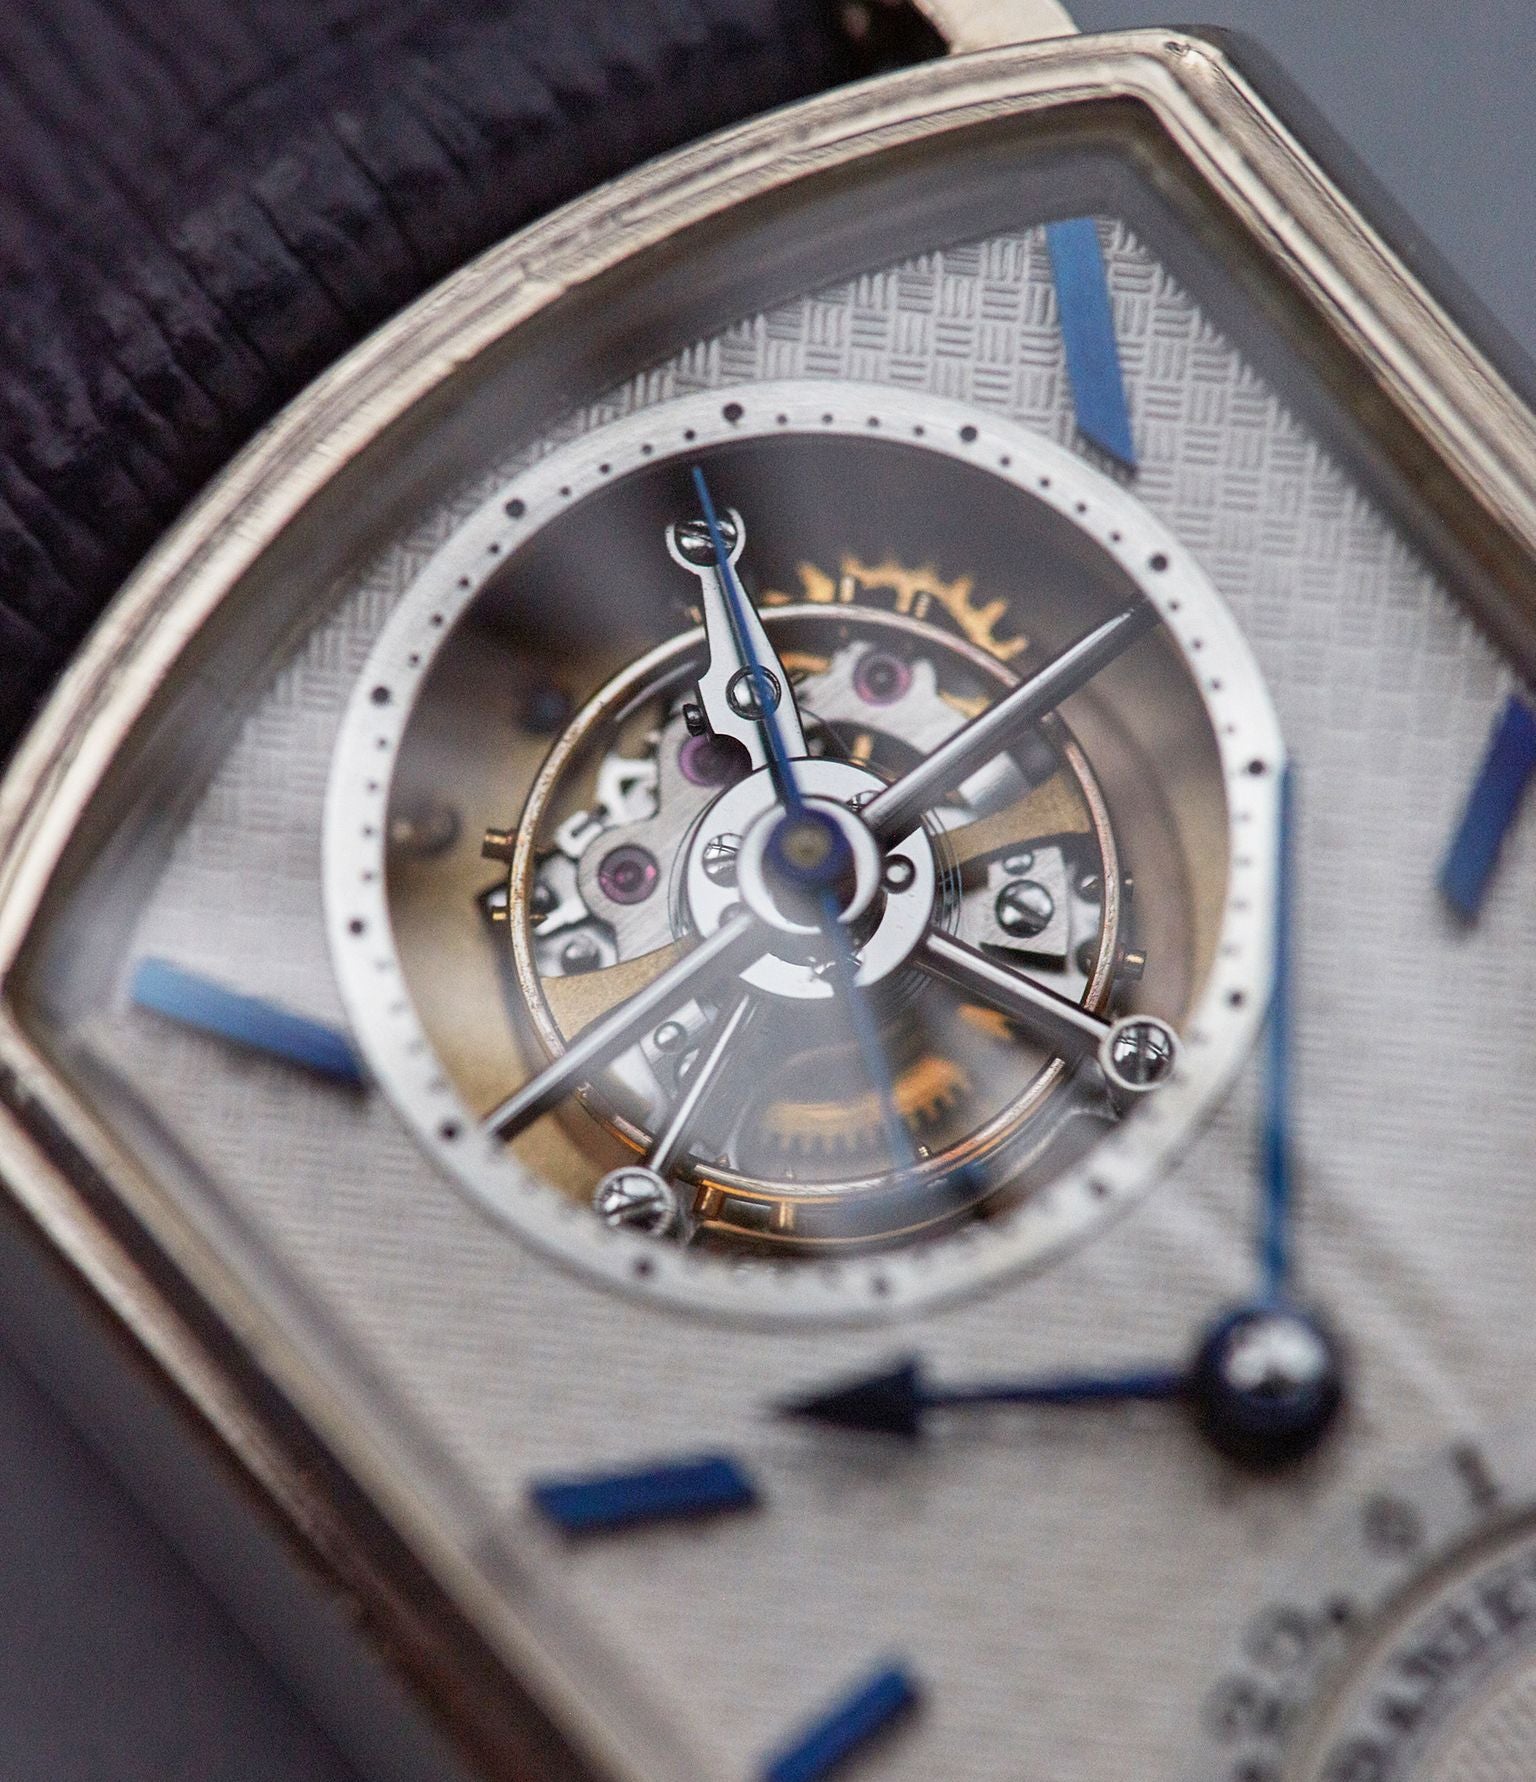 Daniels Blue Tourbillon wristwatch made by Roger Smith for A Collected Man London